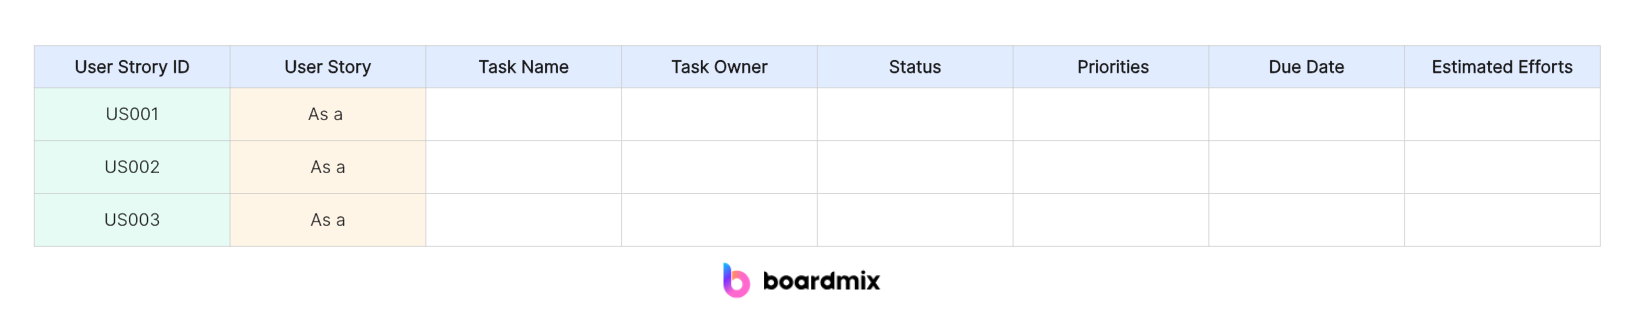 product backlog Boardmix template